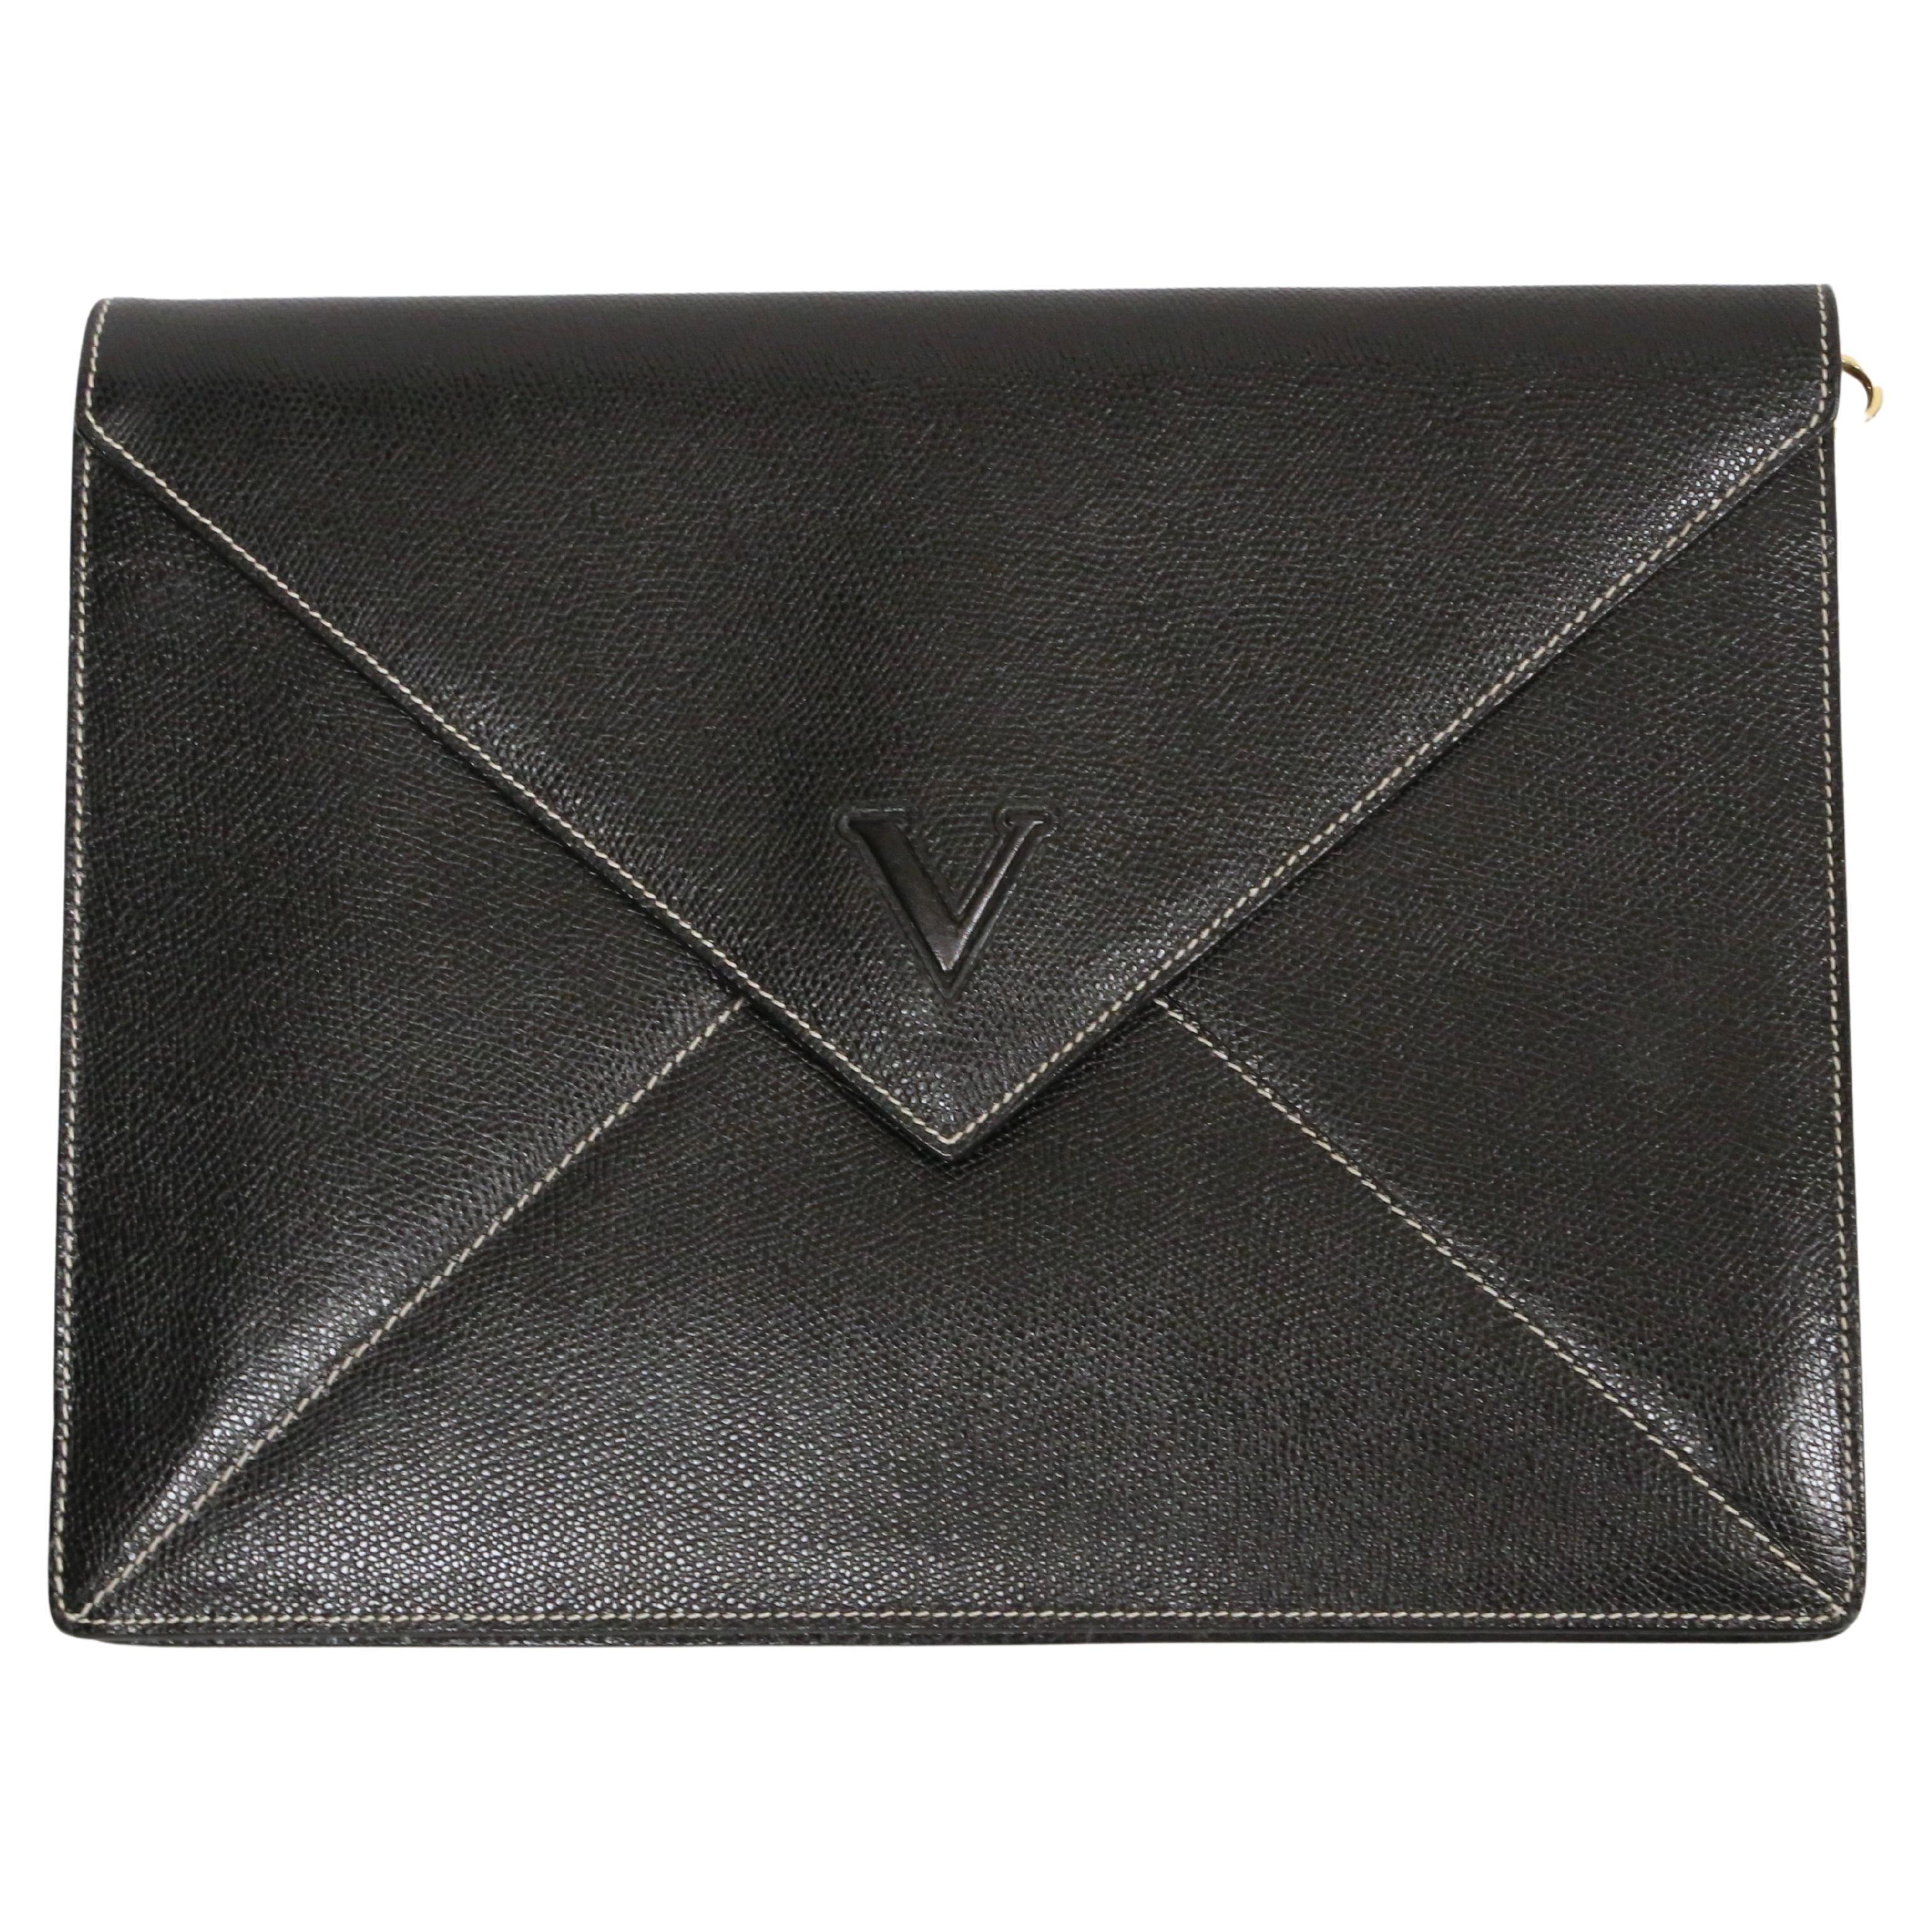  1990's VALENTINO black textured leather convertible 'envelope' clutch bag For Sale